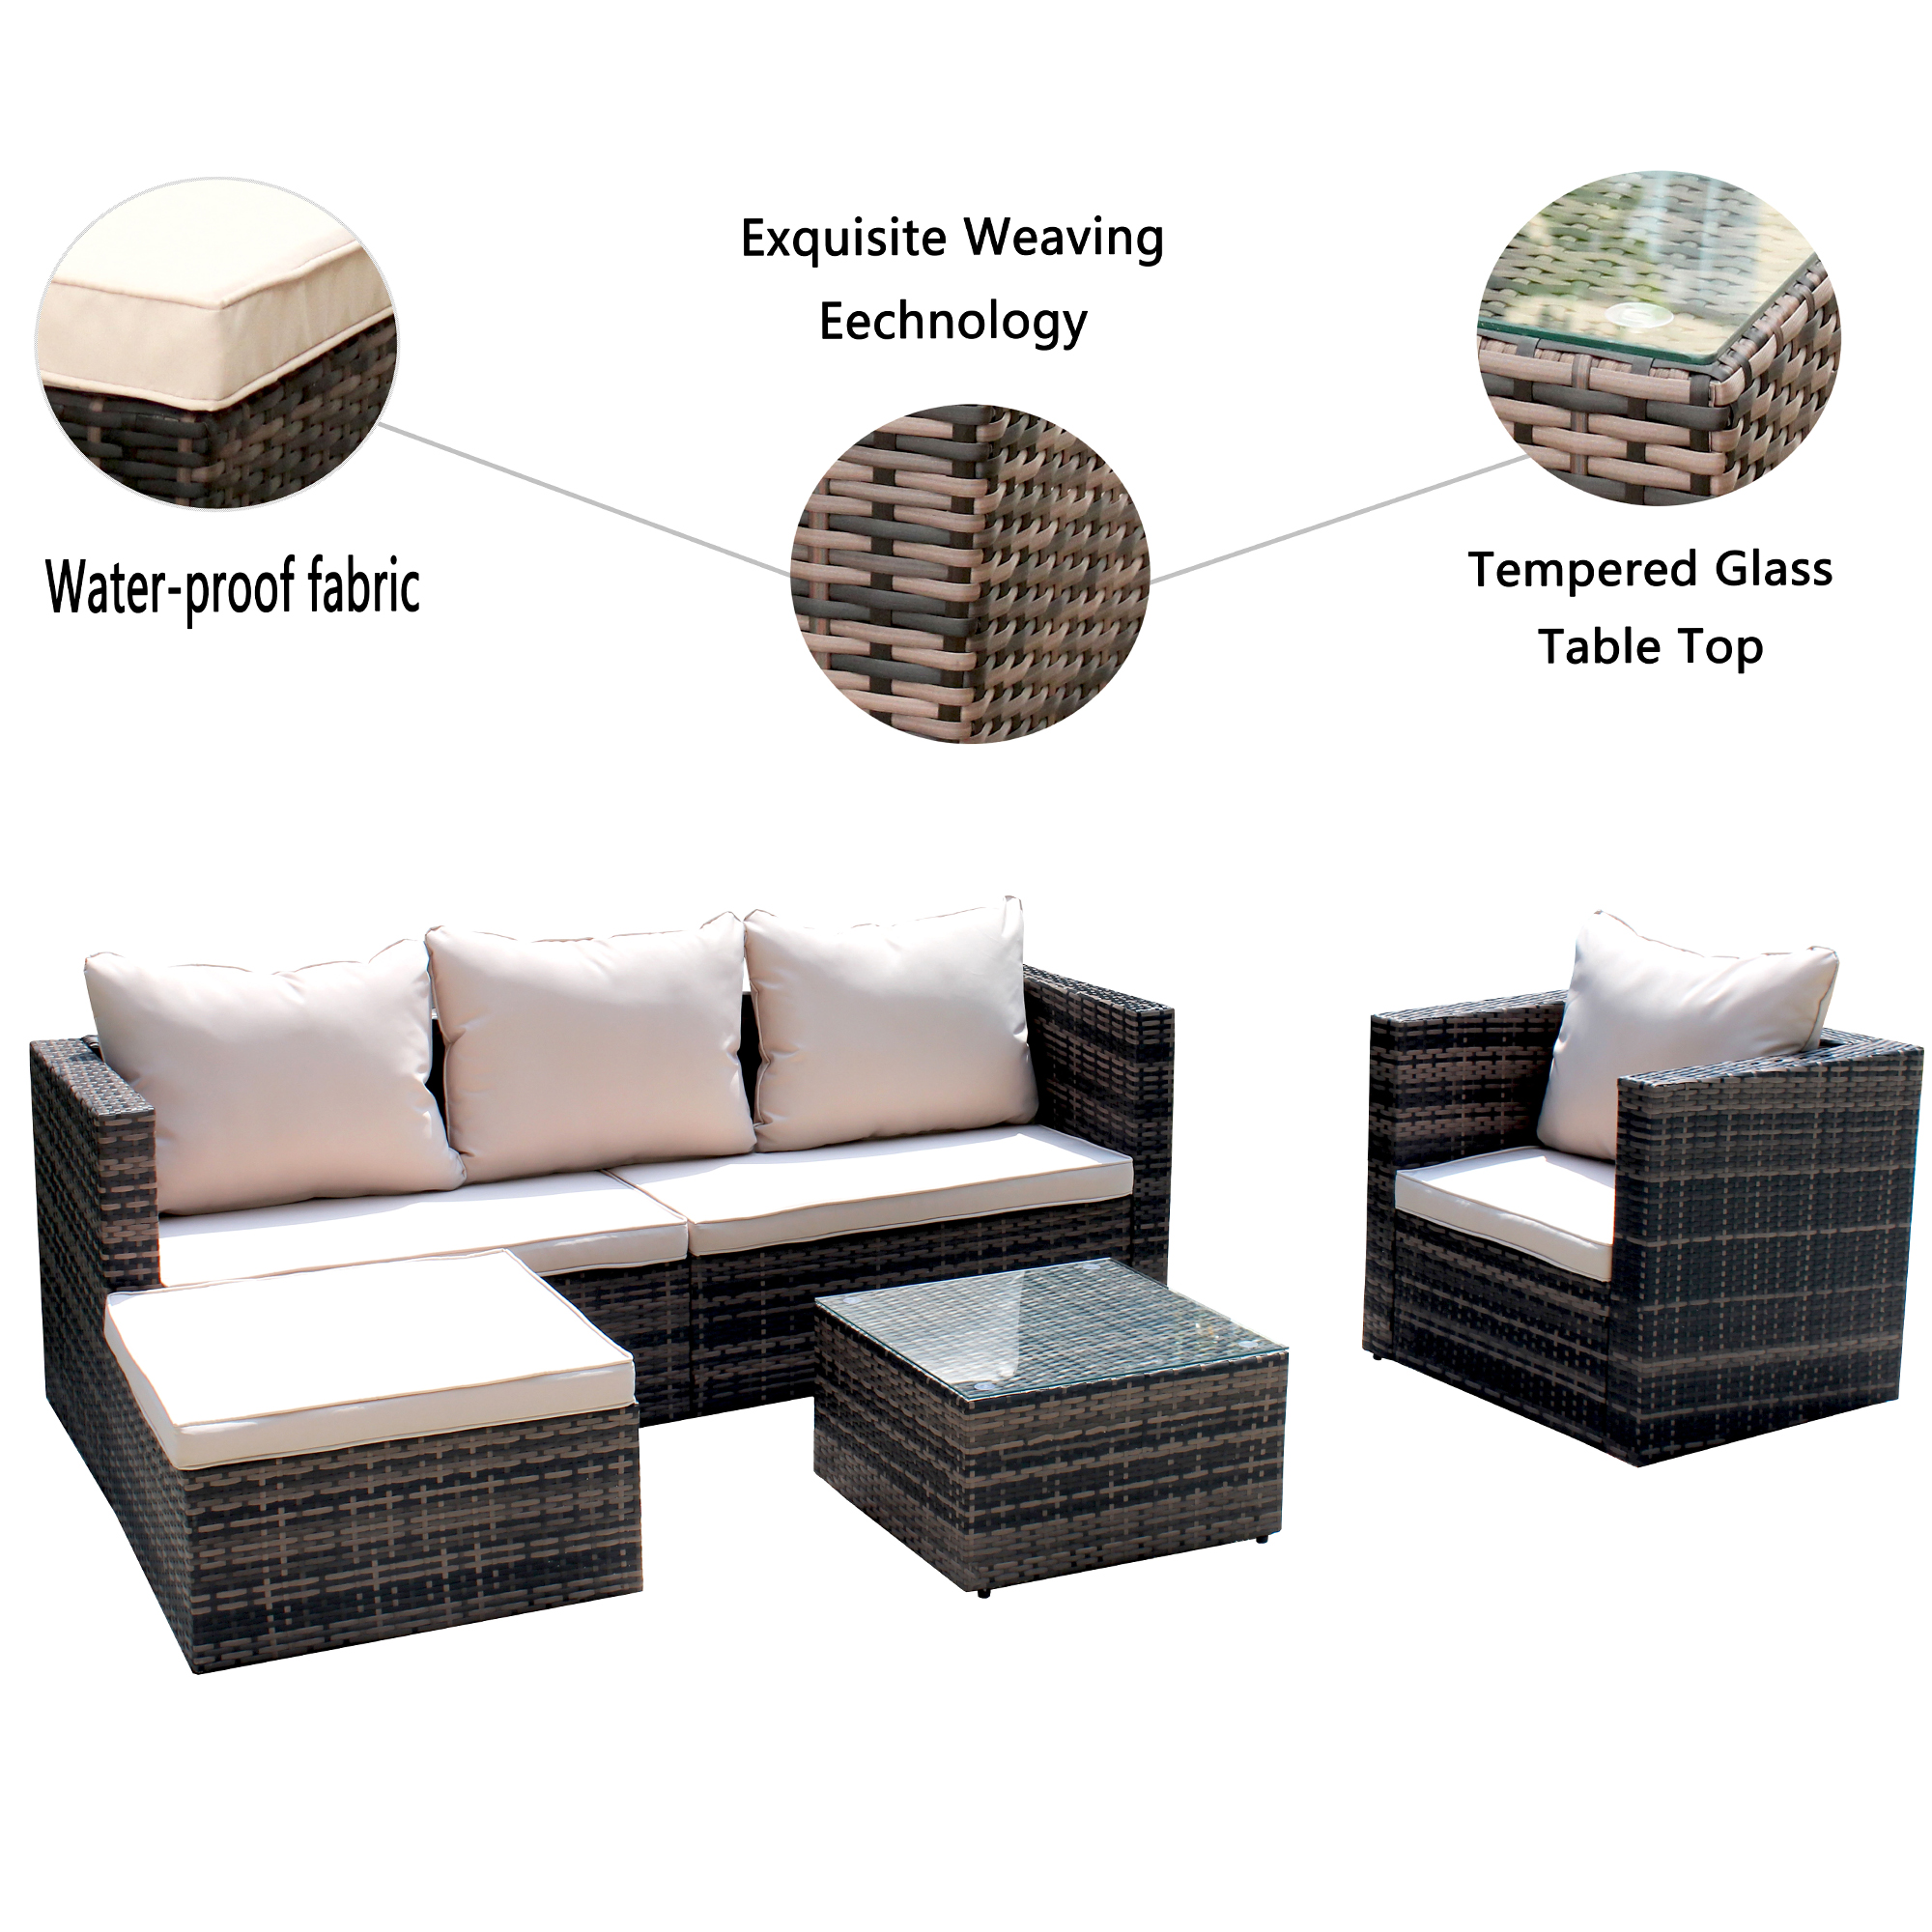 Outdoor Conversation Sets, 4 Piece Patio Furniture Sets with Wicker Chair, 3-Seat Sofa, Ottoman, Glass Table, All-Weather PE Rattan Patio Sectional Sofa Set for Backyard, Porch, Garden, Pool, L4487 - image 4 of 11